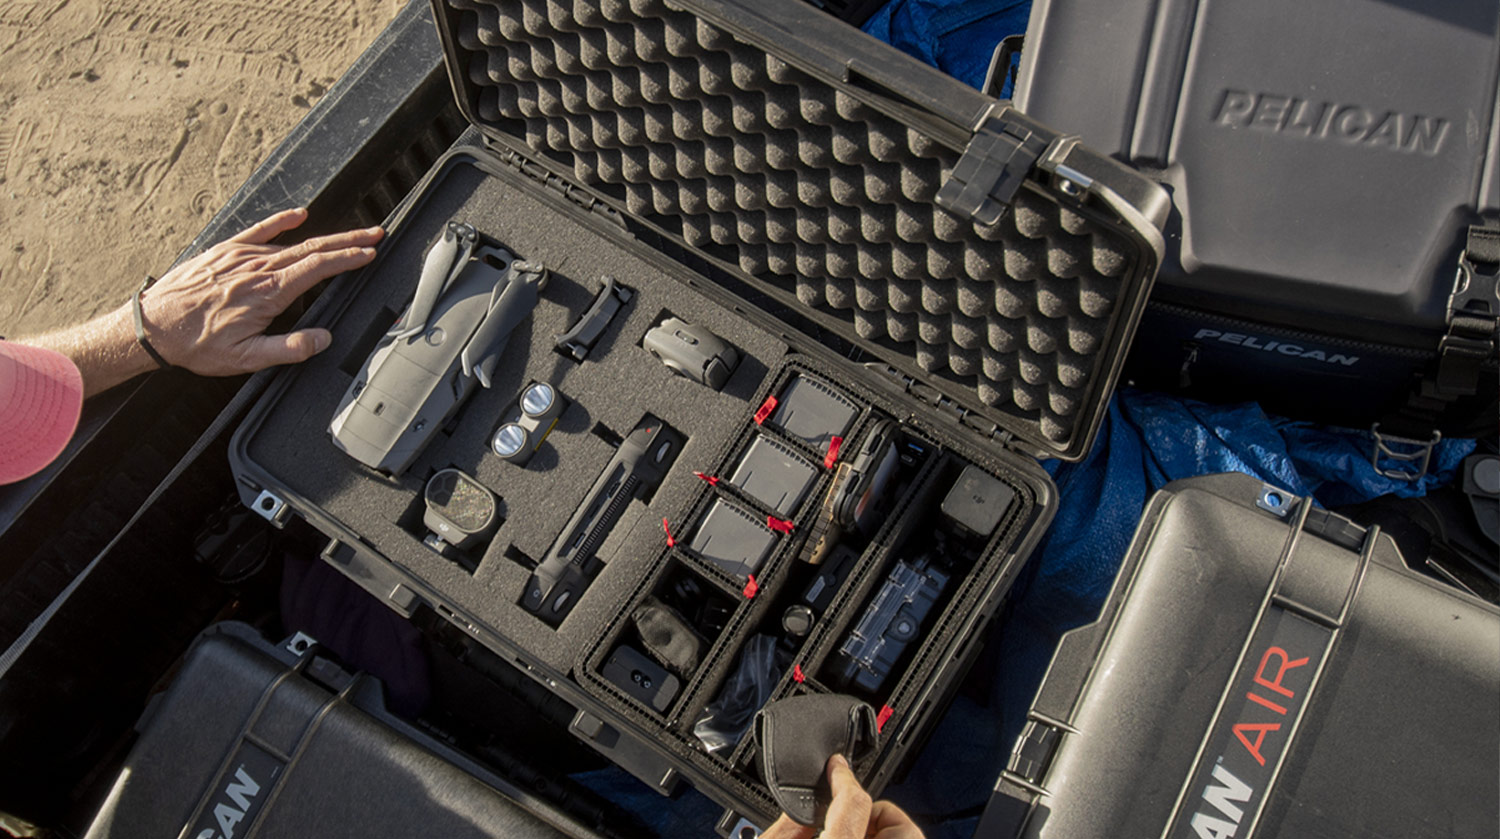 pelican professional blog choosing the right pelican case for your gear